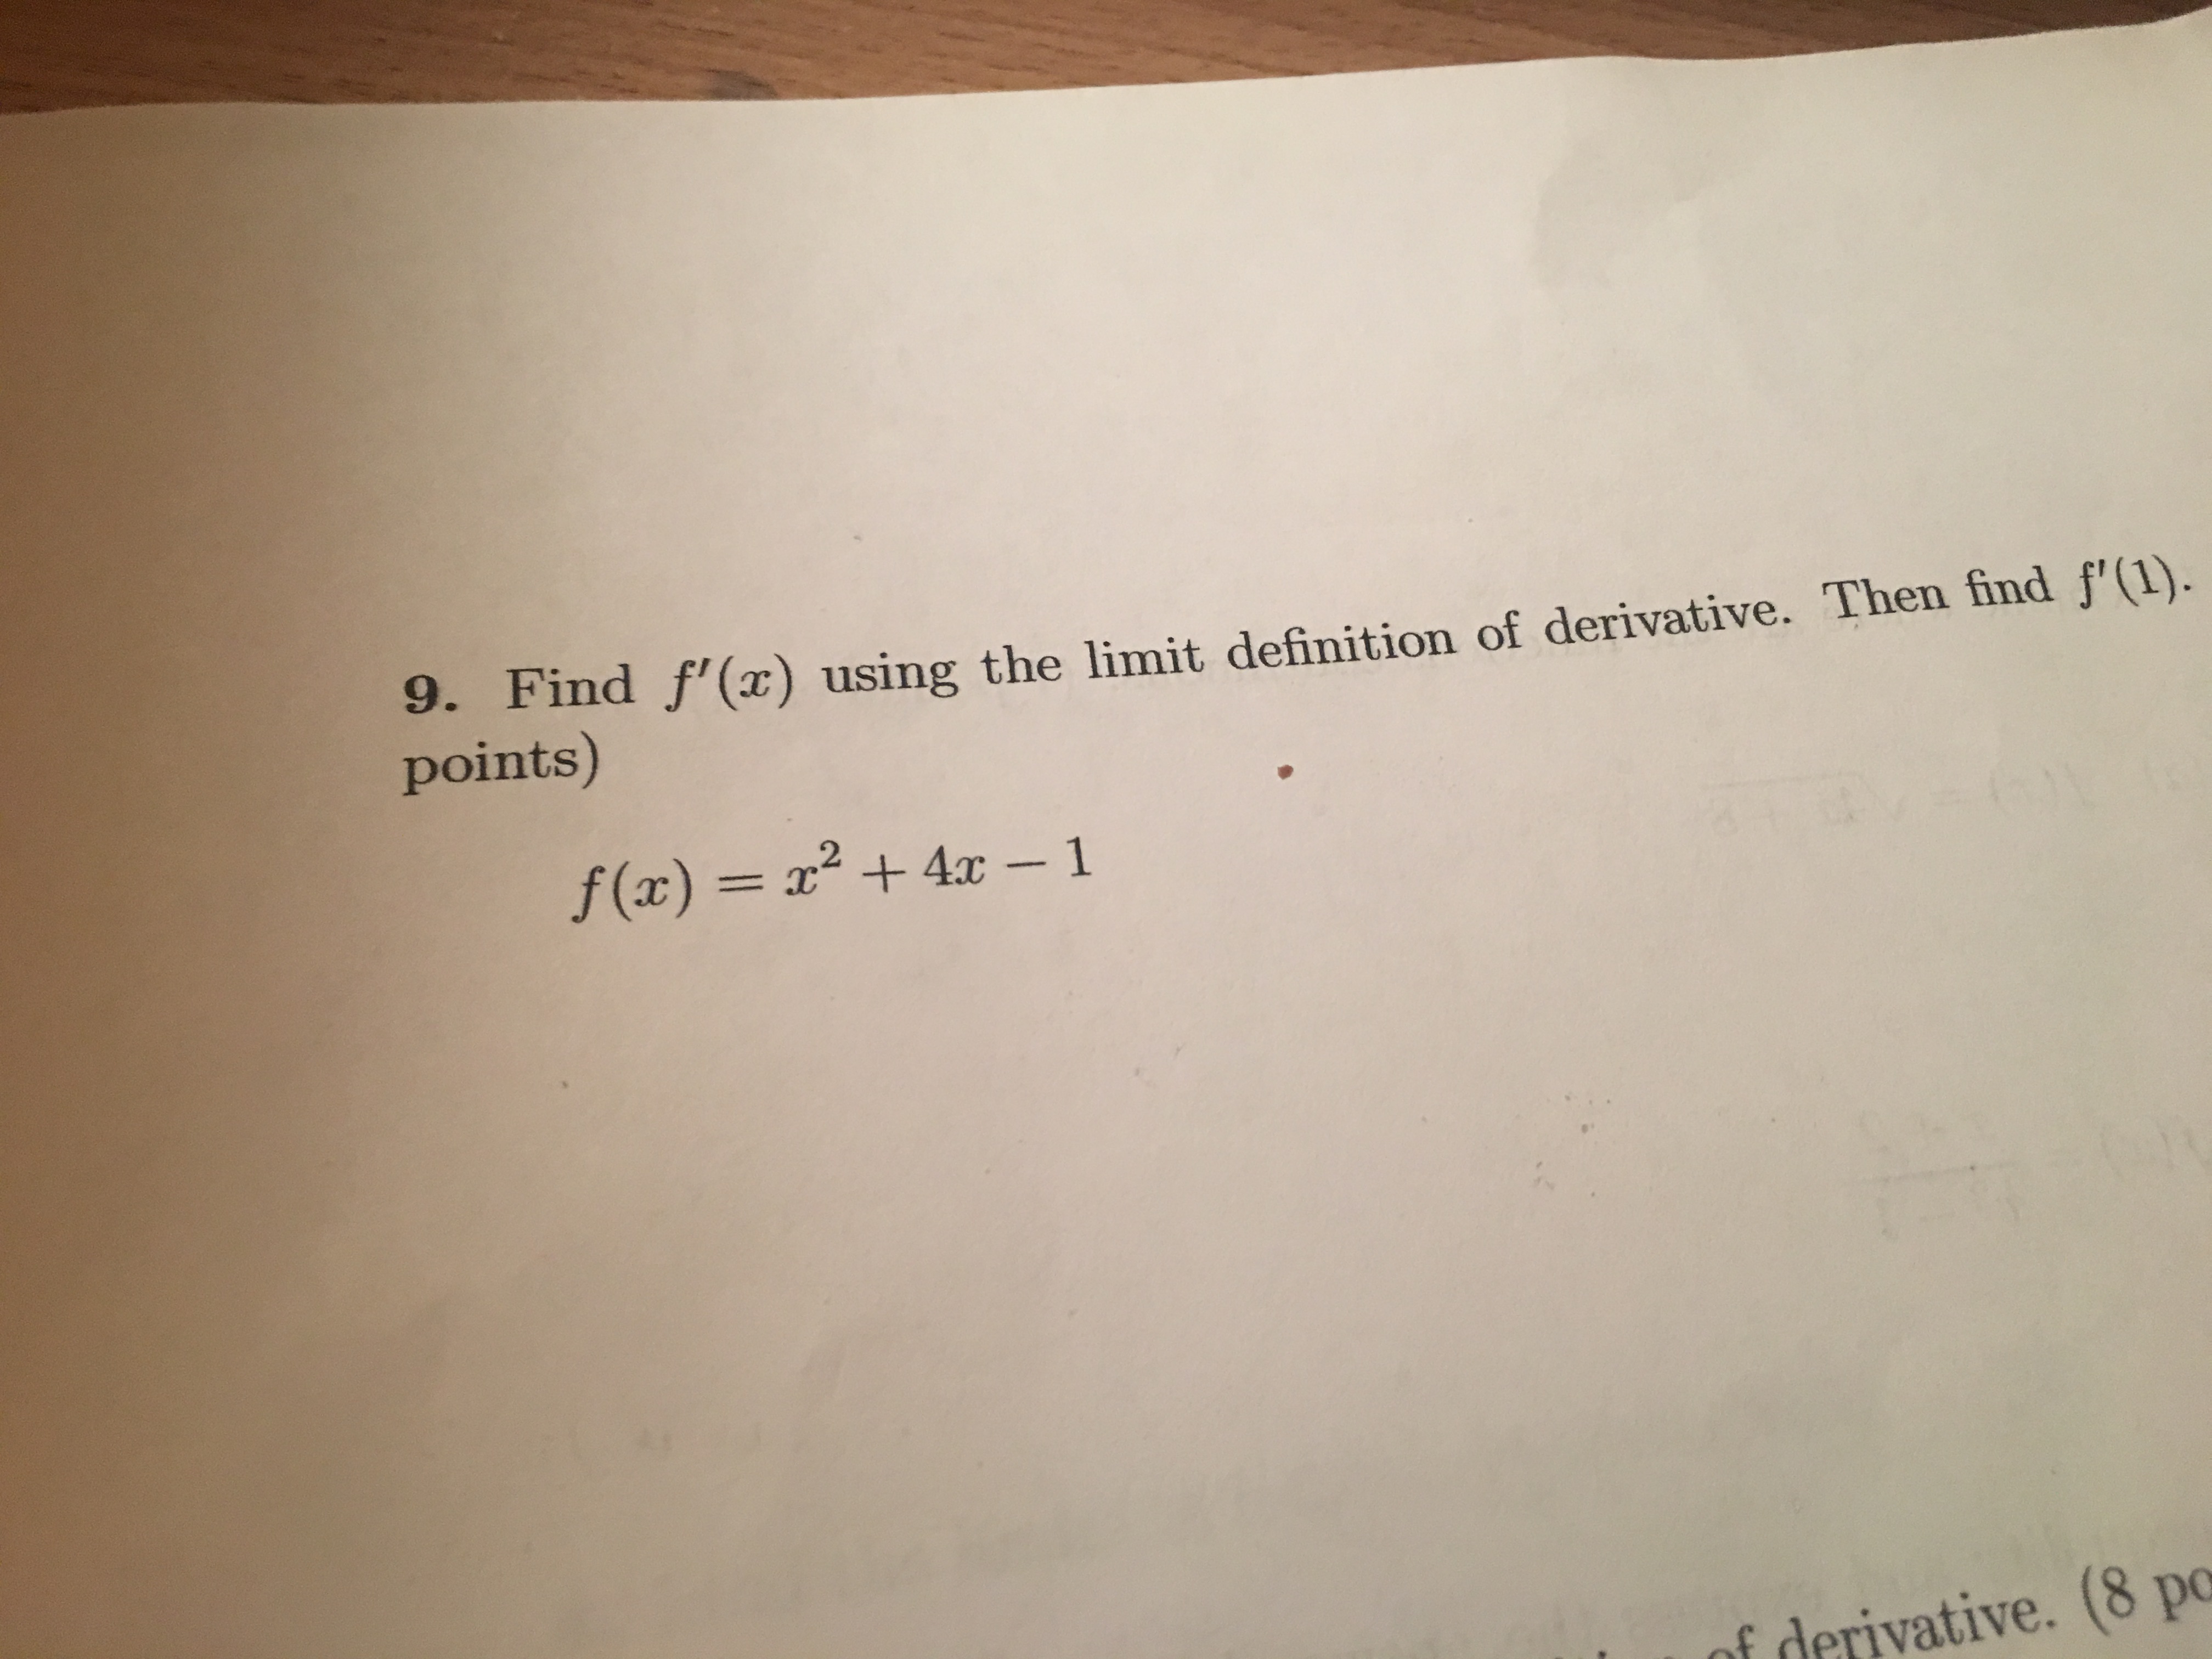 9. Find f(z)
points)
using the limit definition of derivative. Then find f'(1
f(x) = x2 + 4x-1
privative. (8 po
